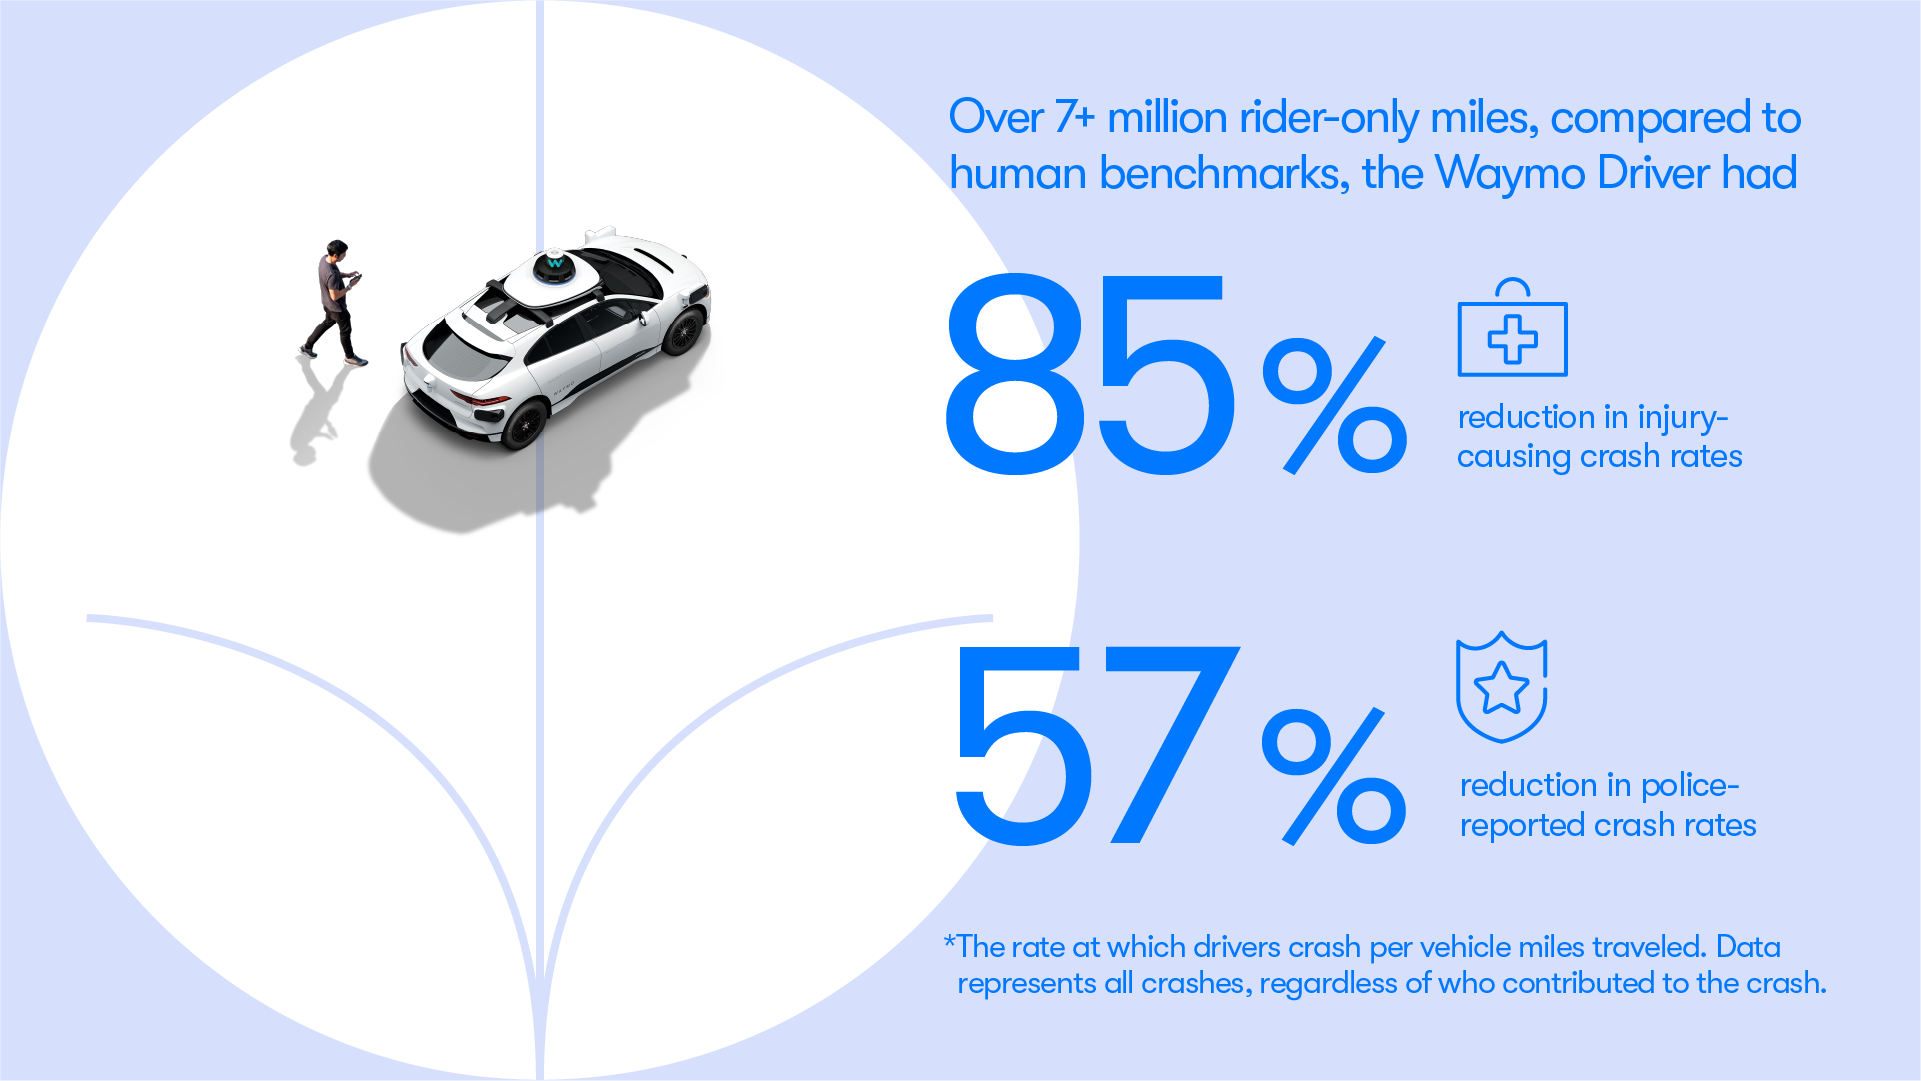 Over 7 Million Rider Only Miles, compared to human benchmarks, the Waymo Driver had 85% reduction in injury causing crash rates and 57% reduction in police-reported crash rates